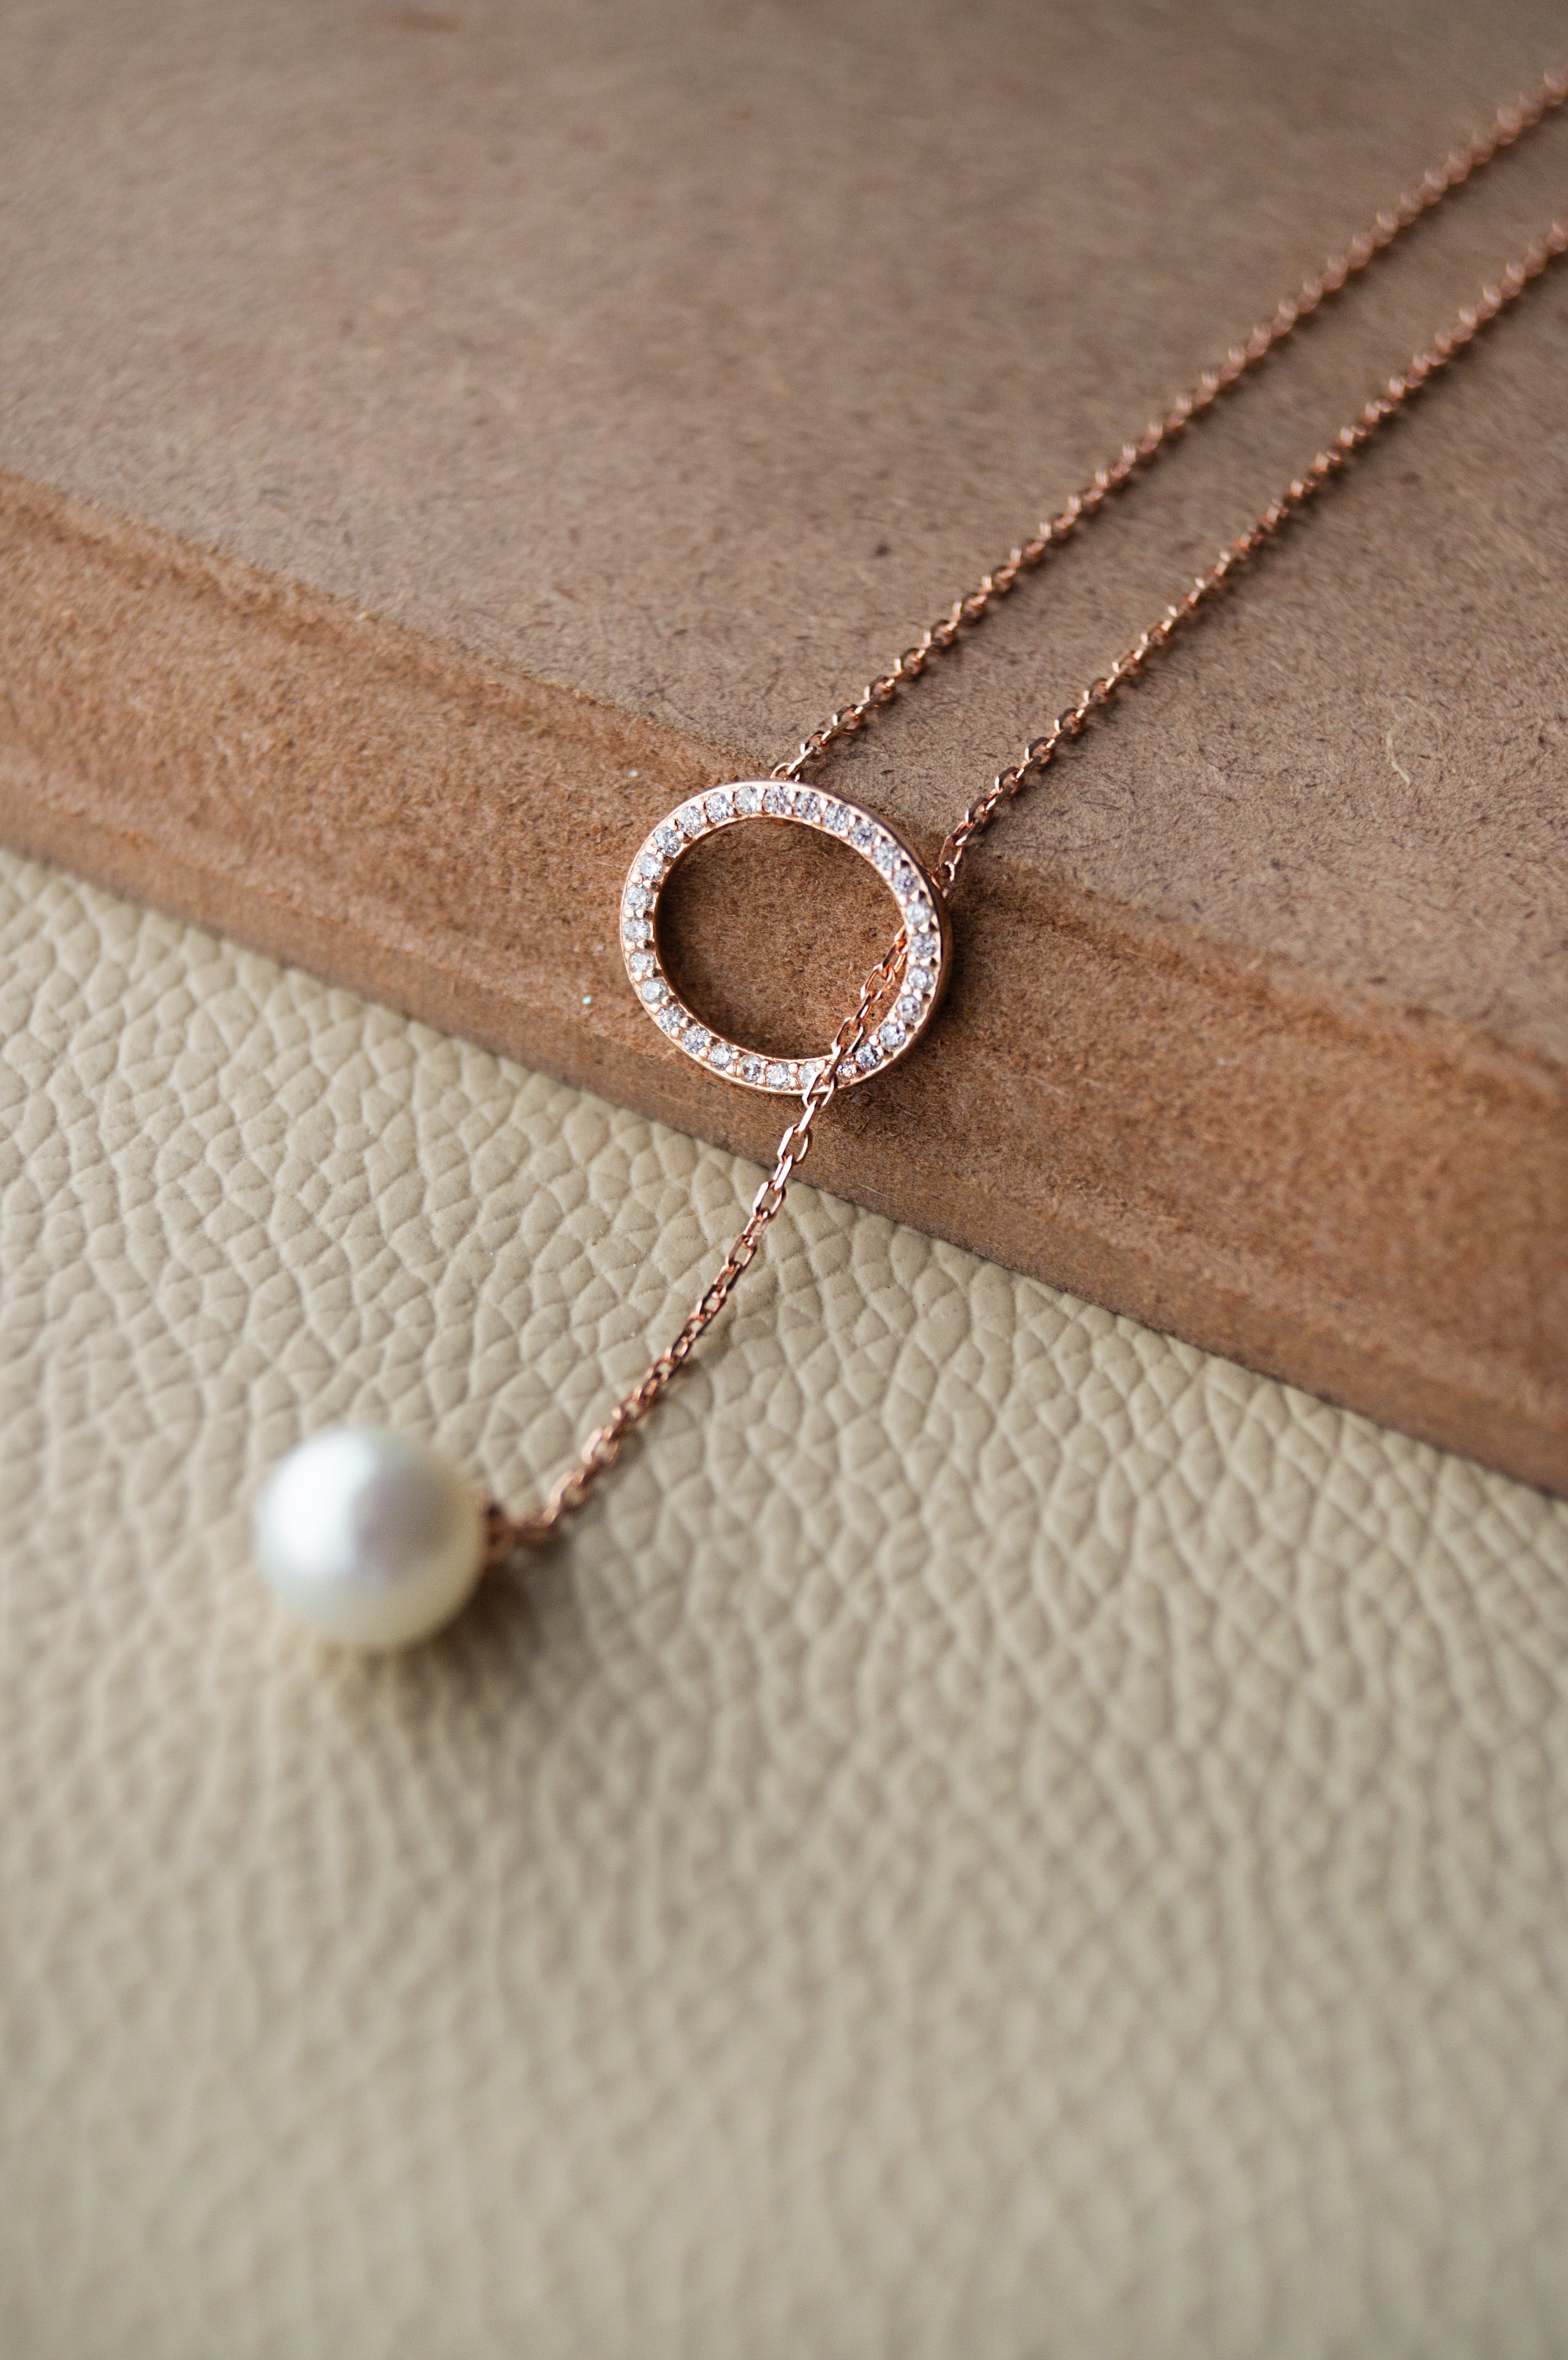 Rose-Gold Necklaces | Chains, Pendants, Layered Necklaces & More - Lovisa